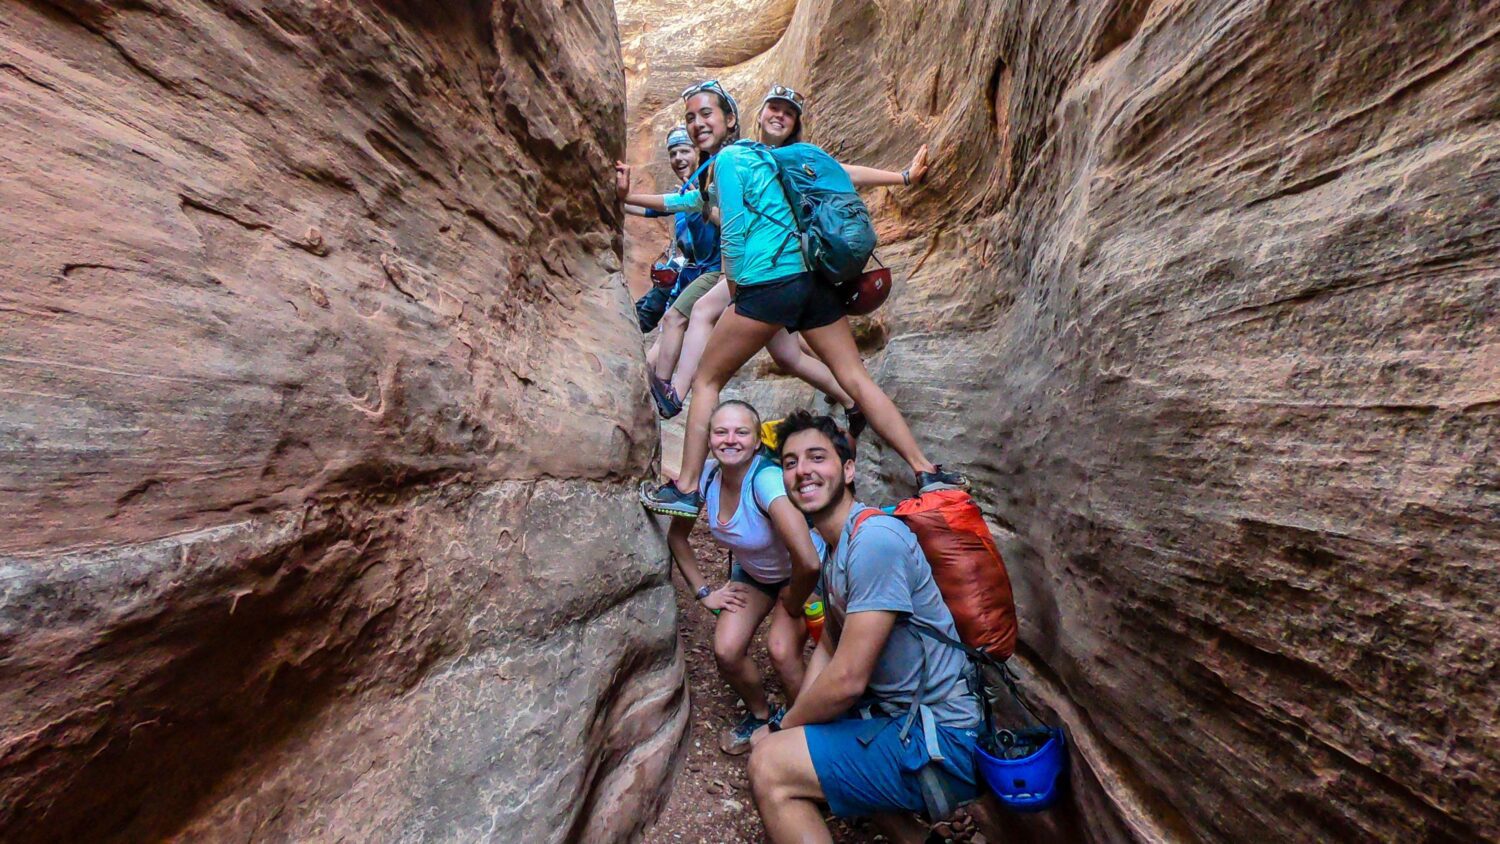 No better outdoor playground than the breathtaking narrows of Southwestern Utah